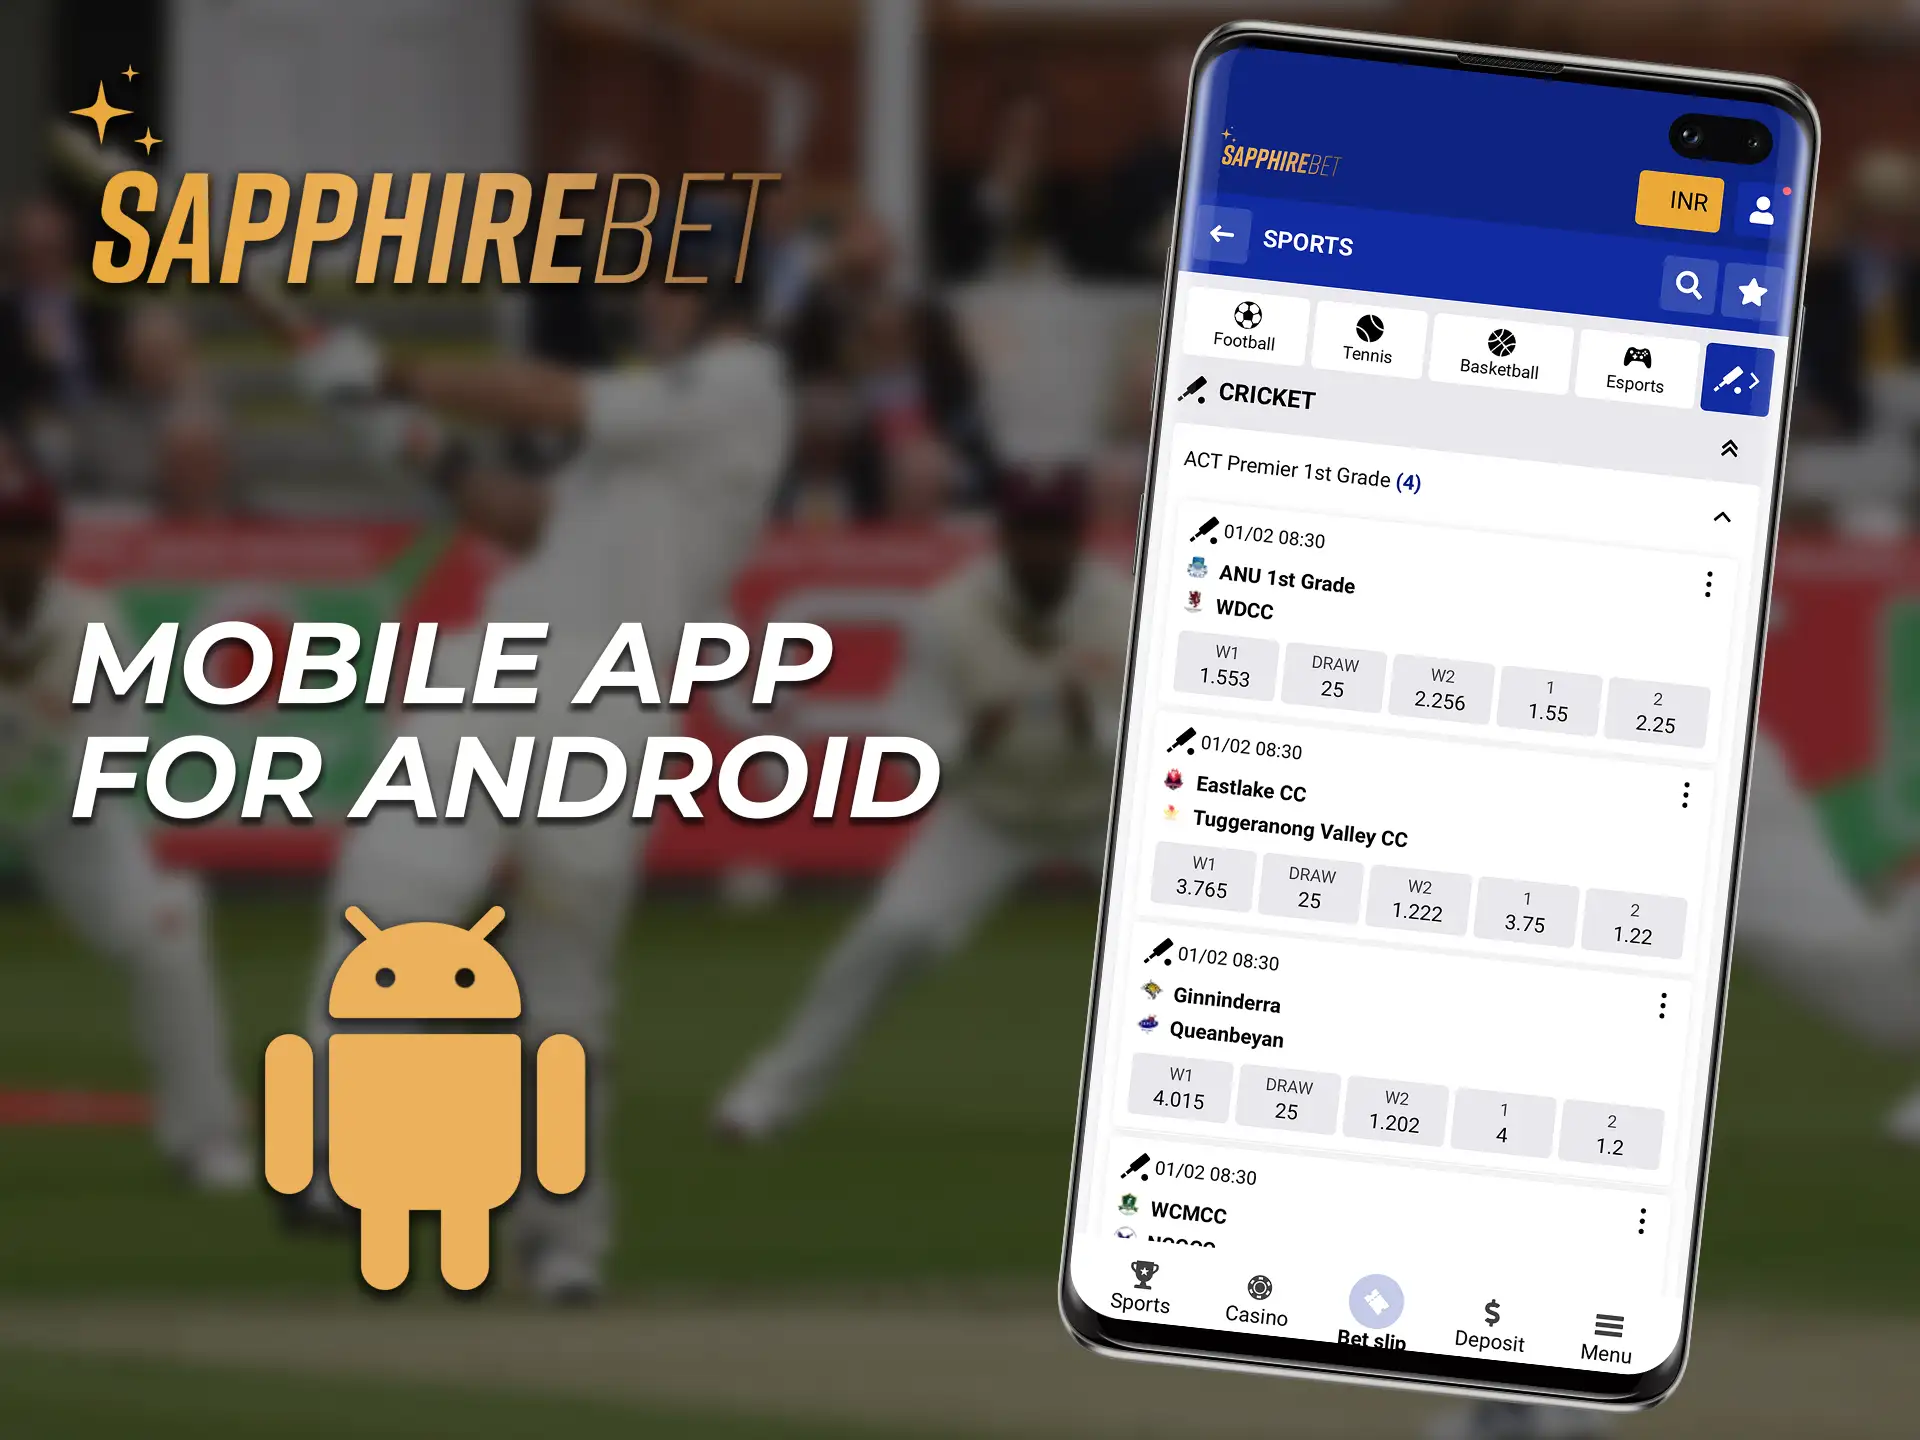 Install the SapphireBet mobile app for Android and bet on sporting events.